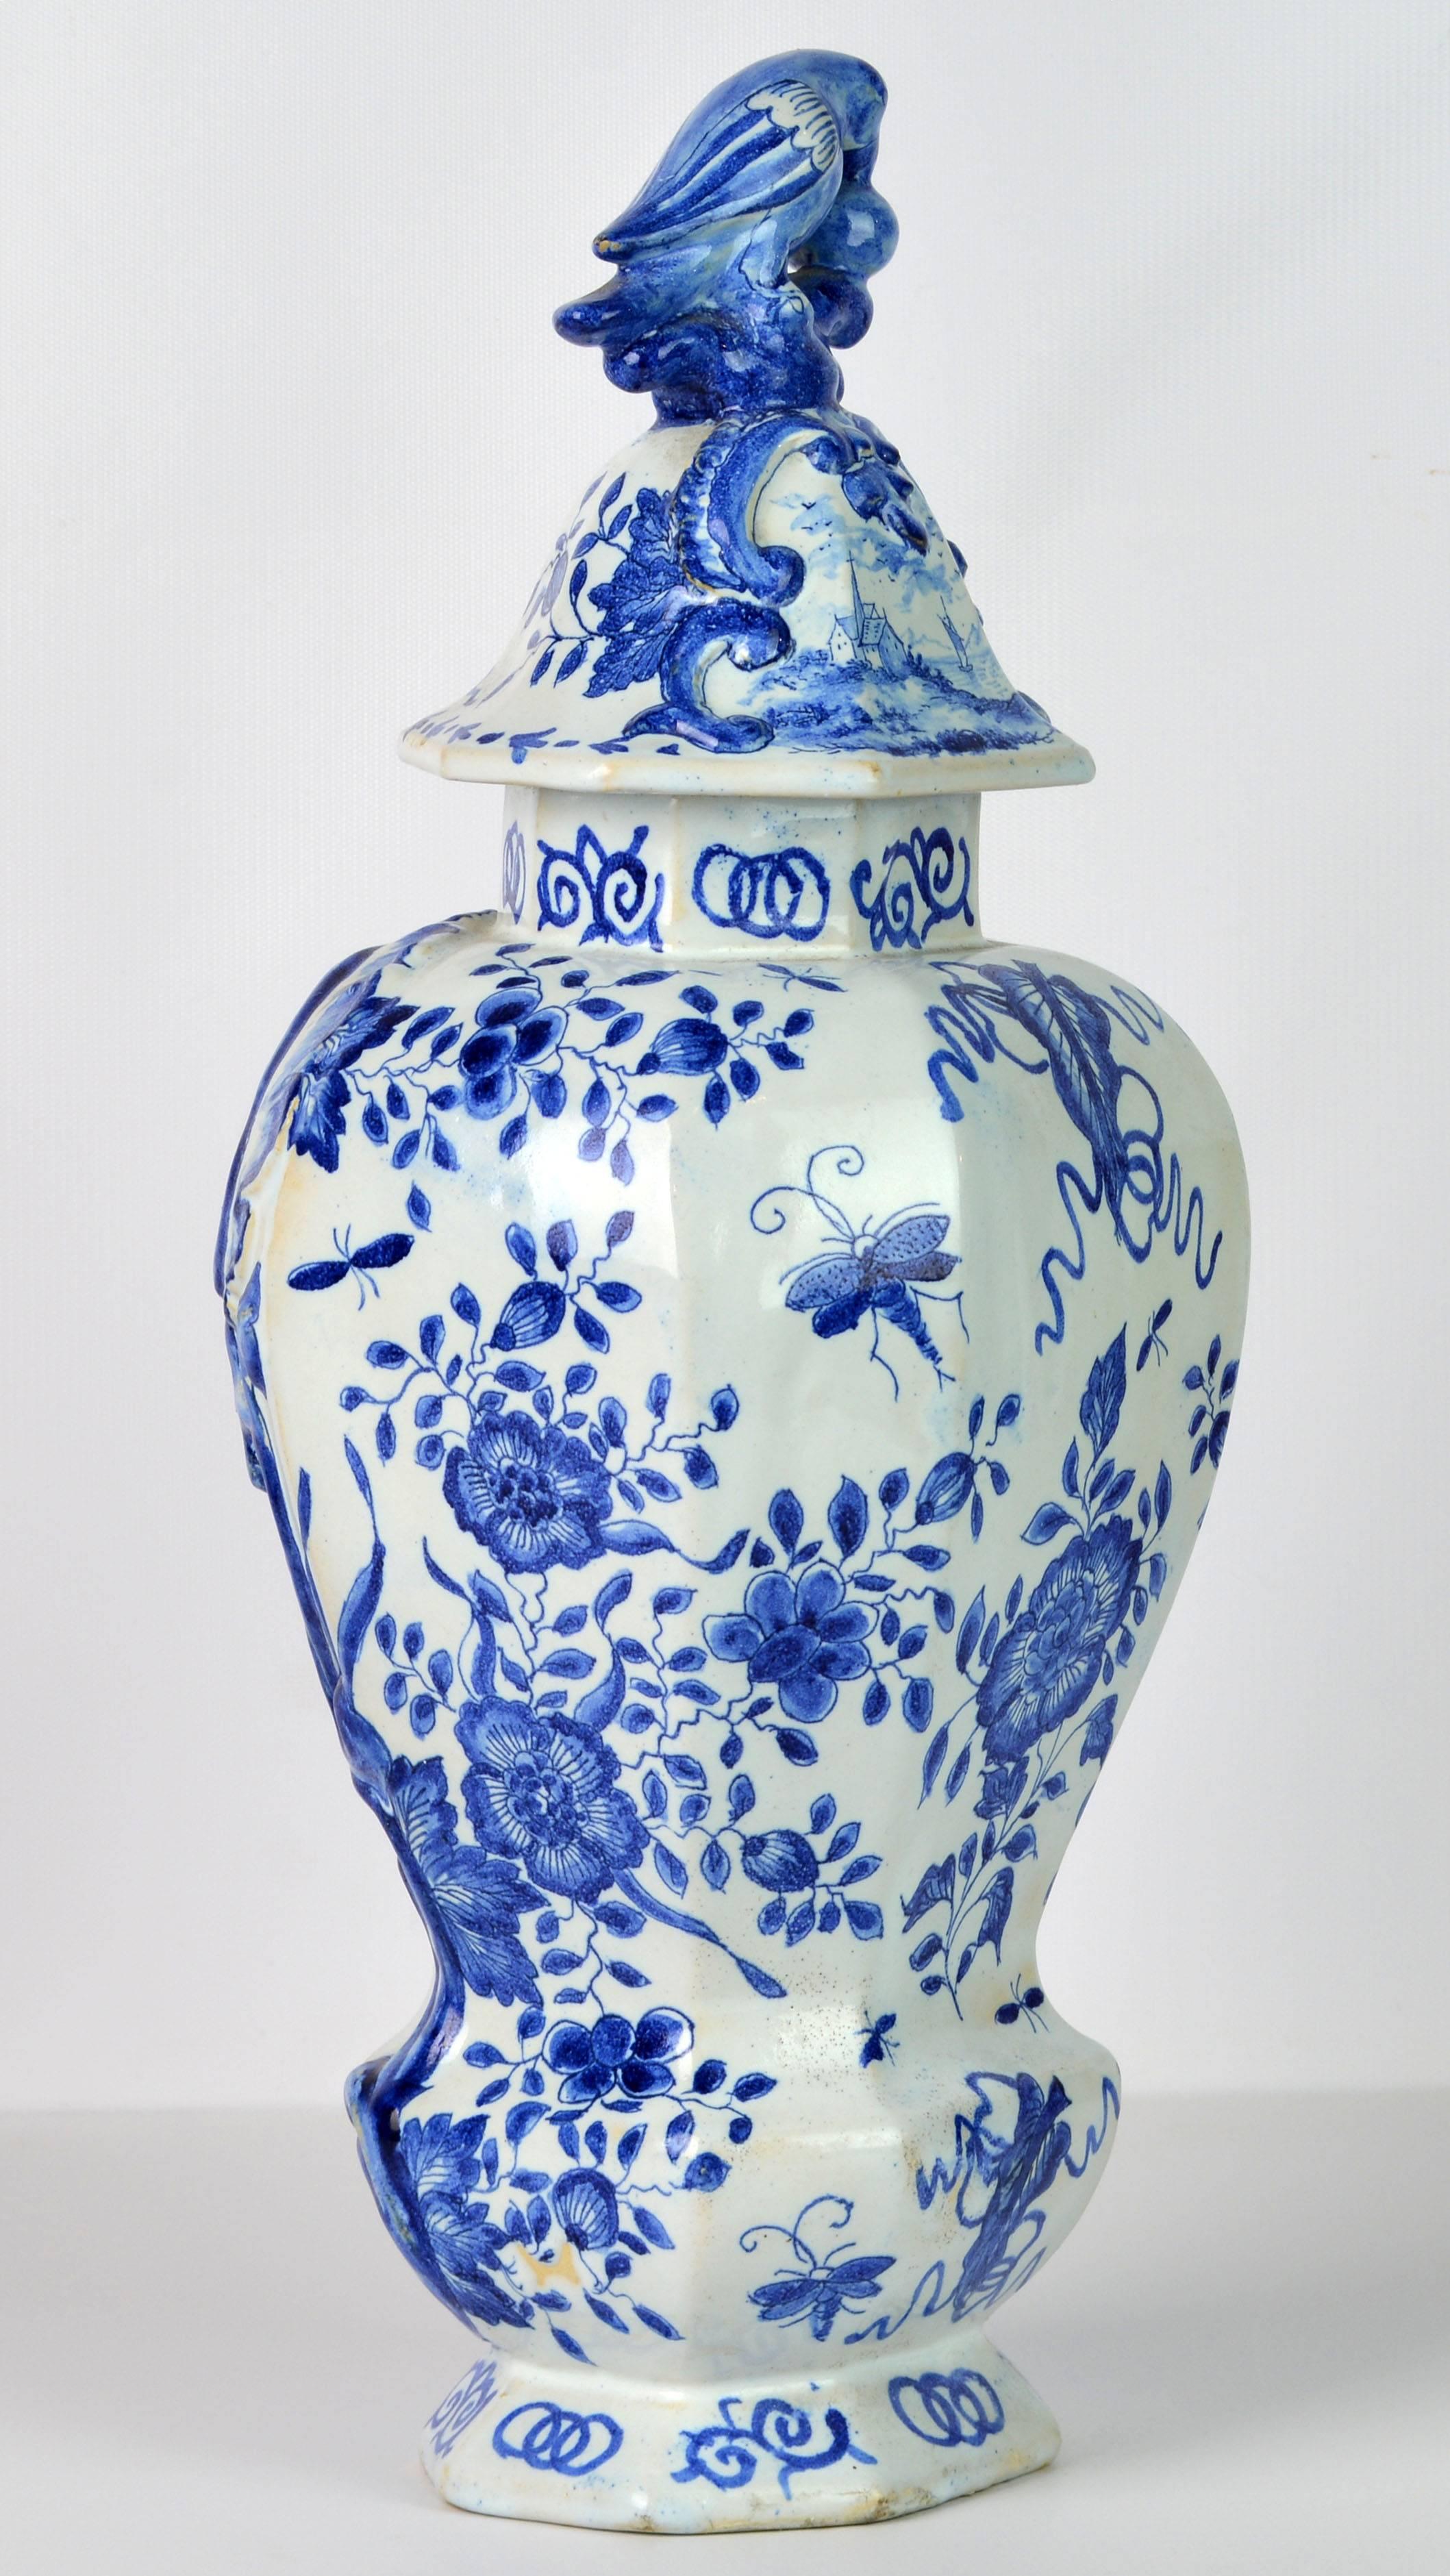 Dutch Blue and White 18th Century Delft Pottery Covered Octagonal Jar with Bird Finial